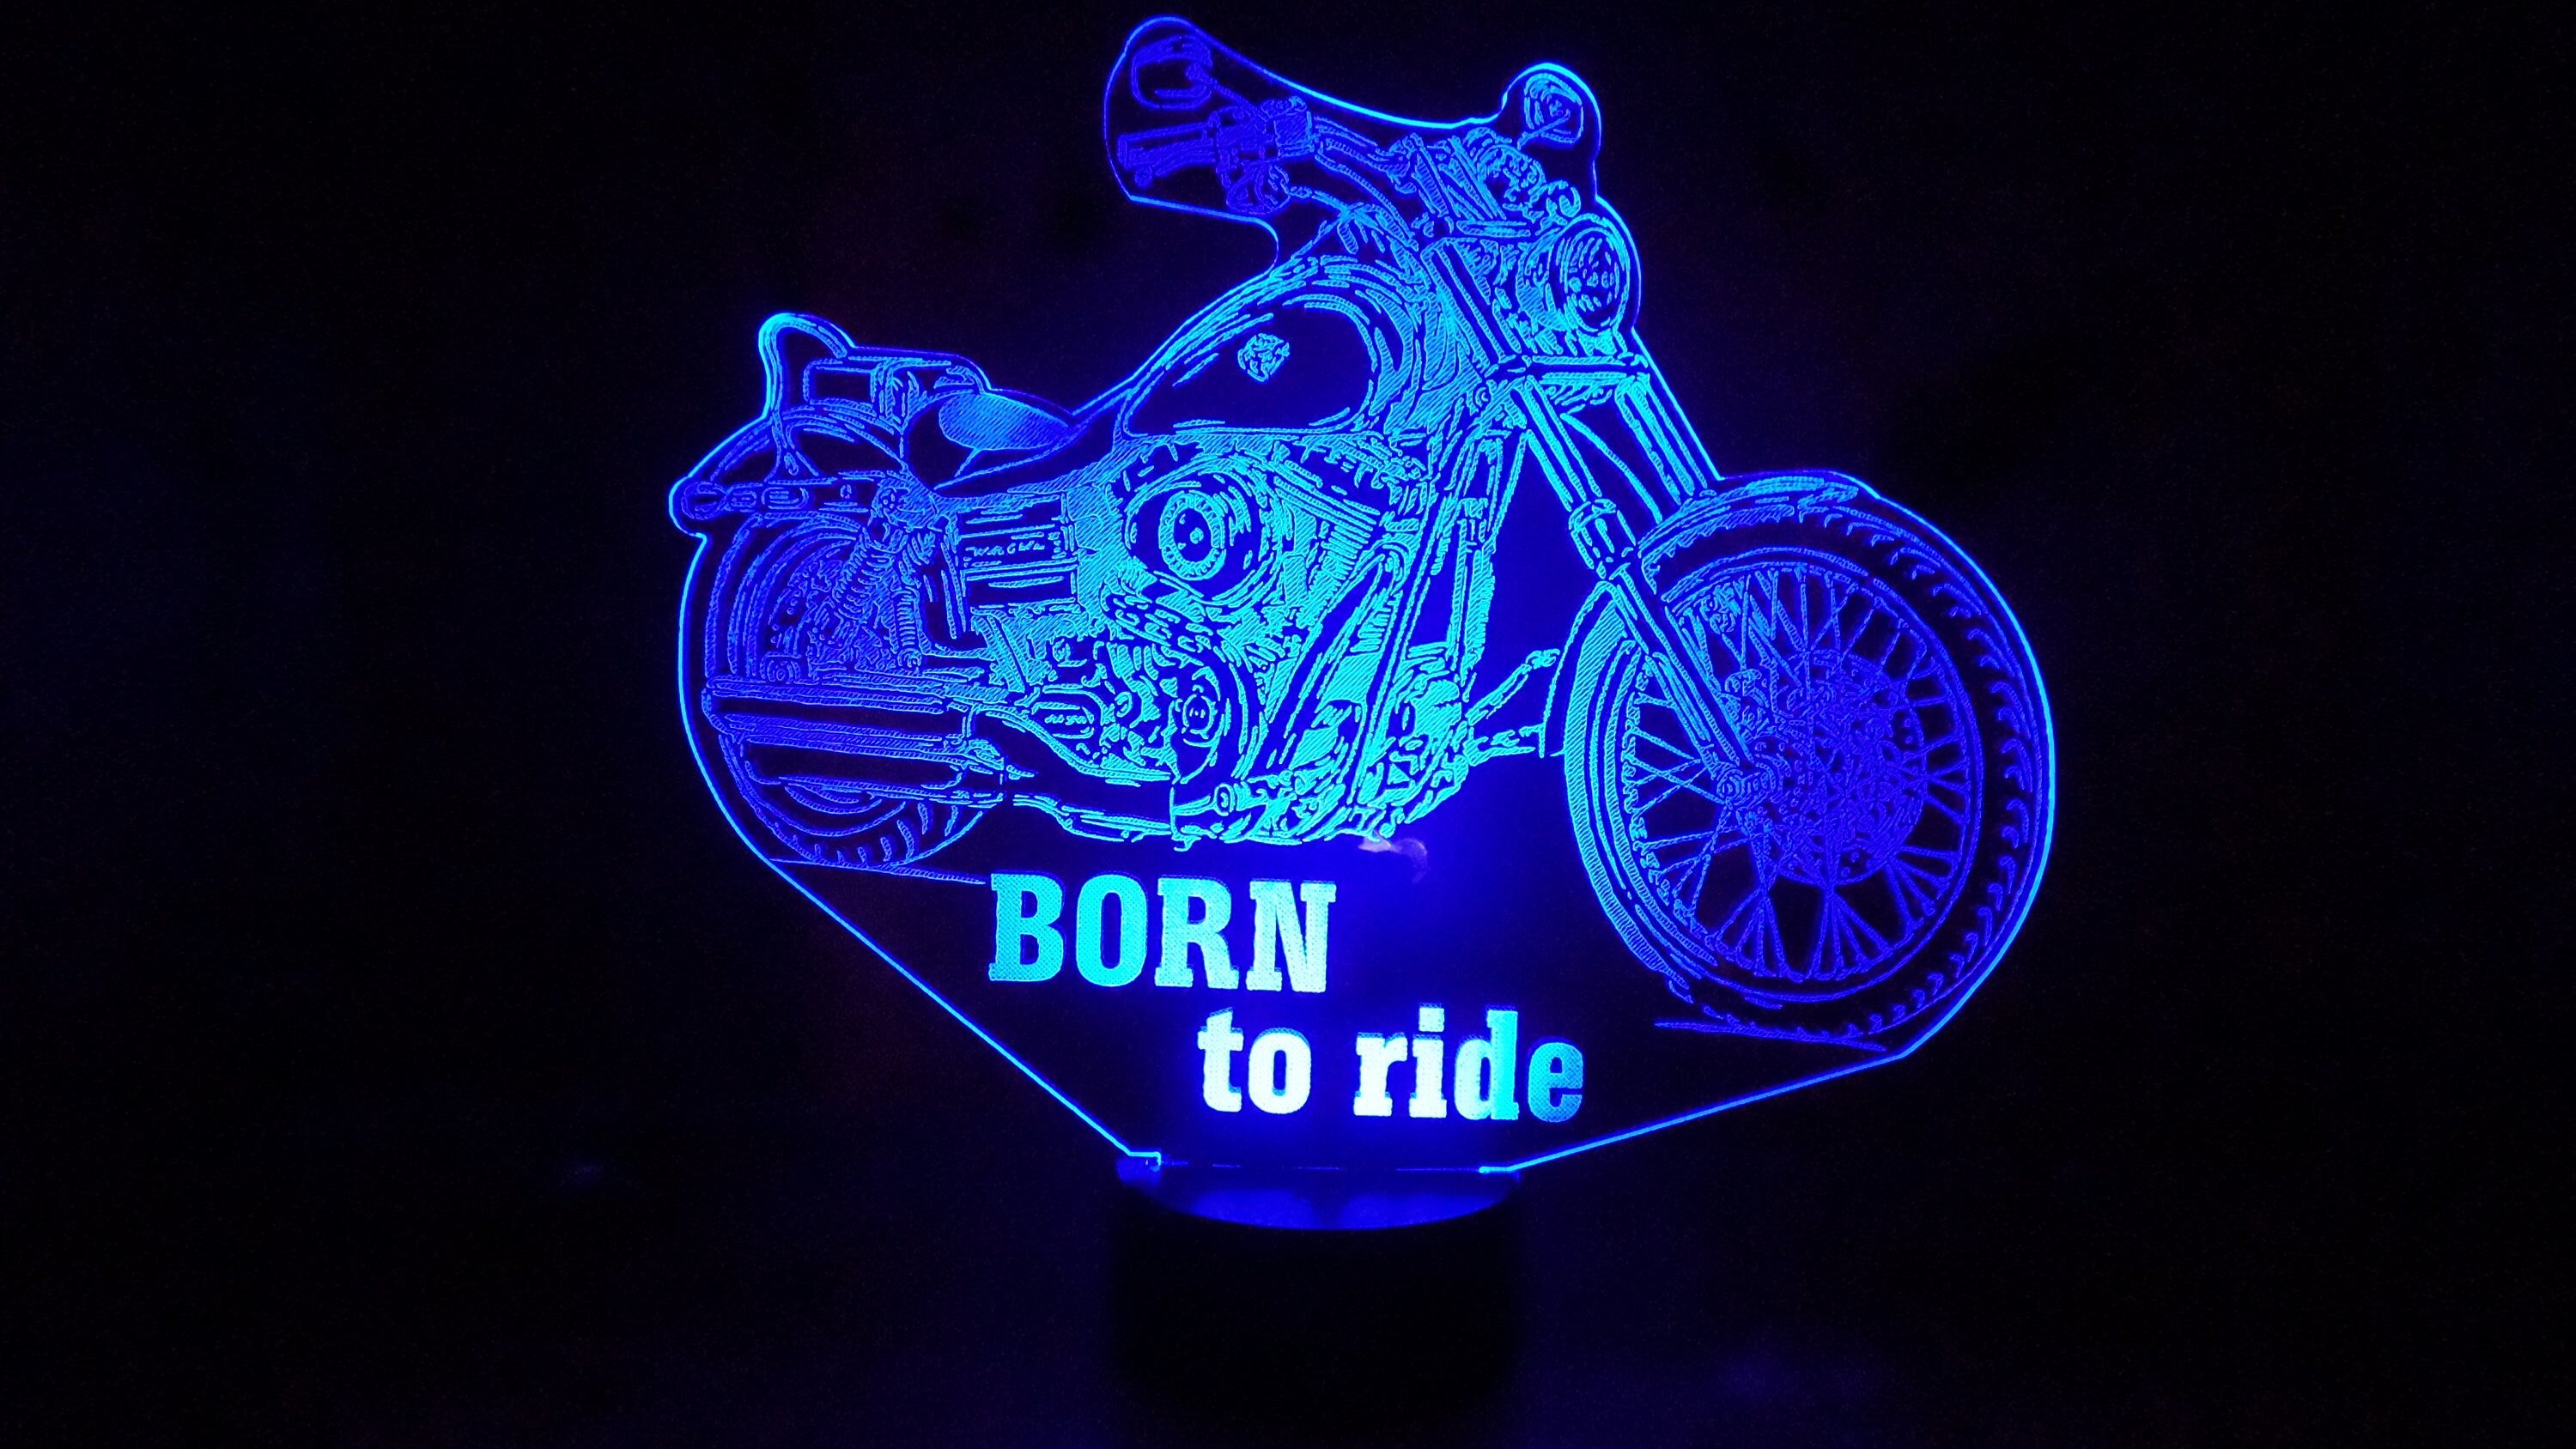 Awesome "BORN to Ride" Motorcycle 3D lamp (1082) - FREE SHIPPING!